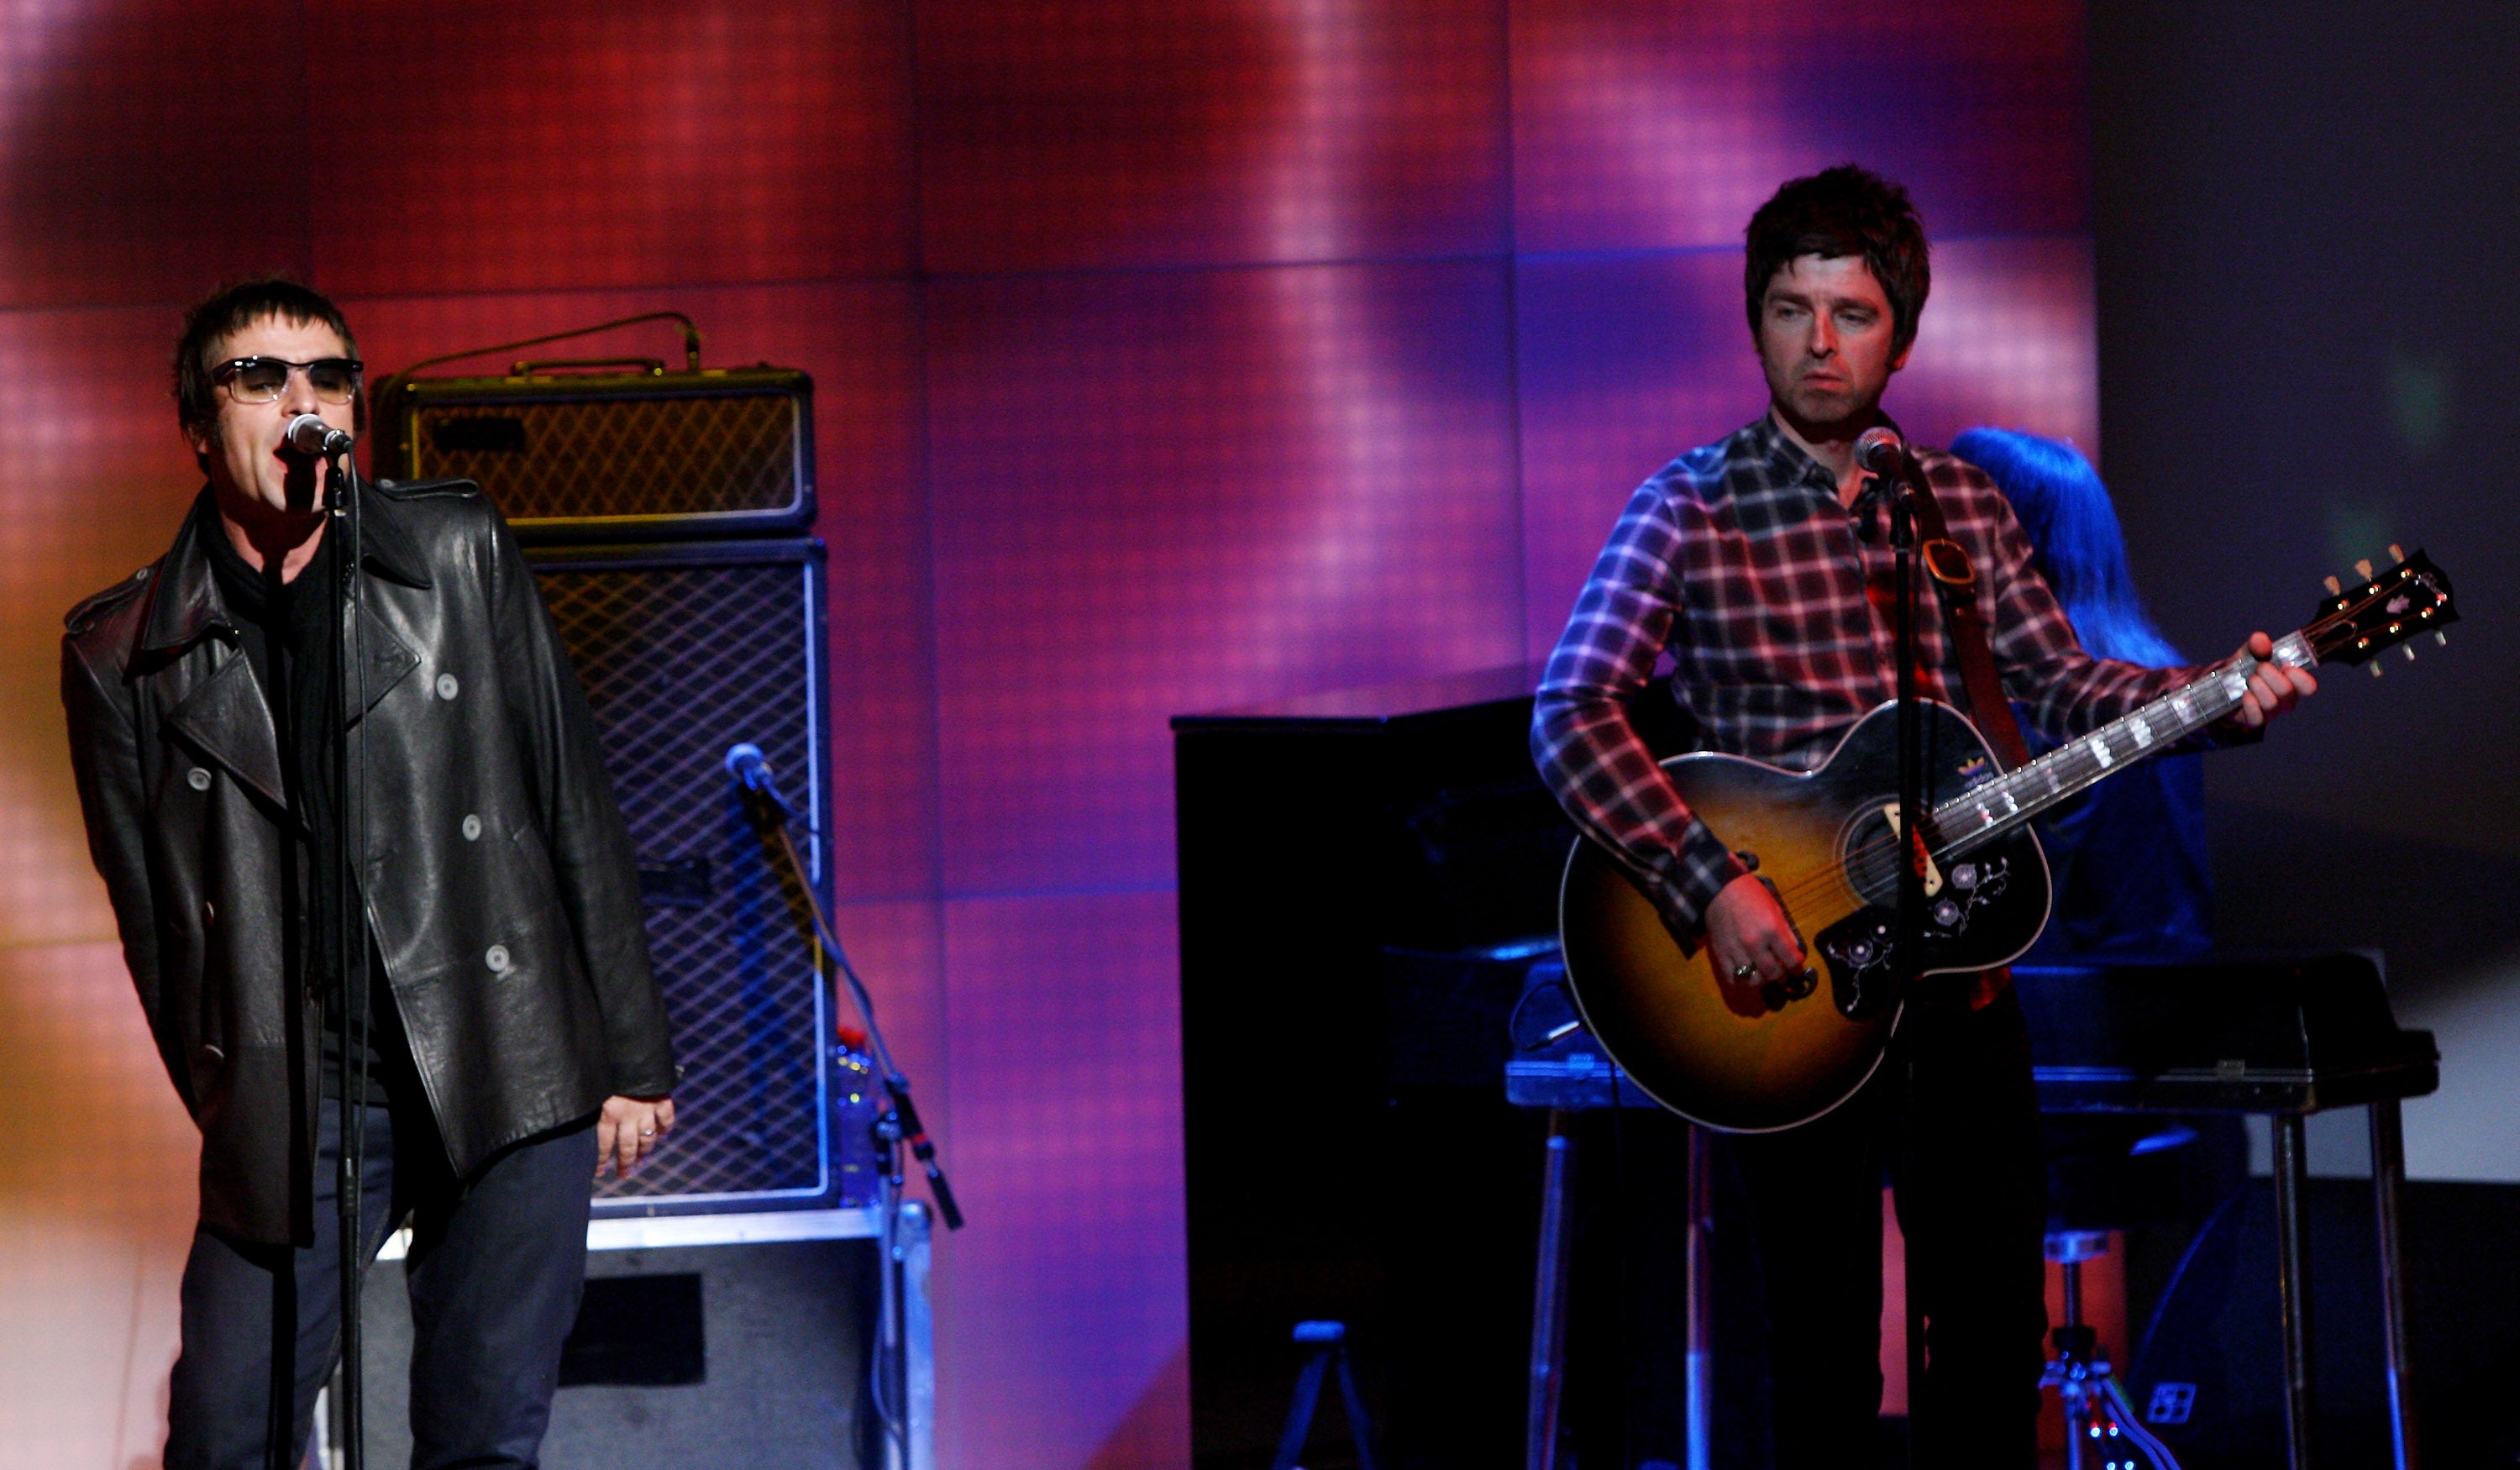 Noel and Liam on stage in 2008, one year before Oasis split